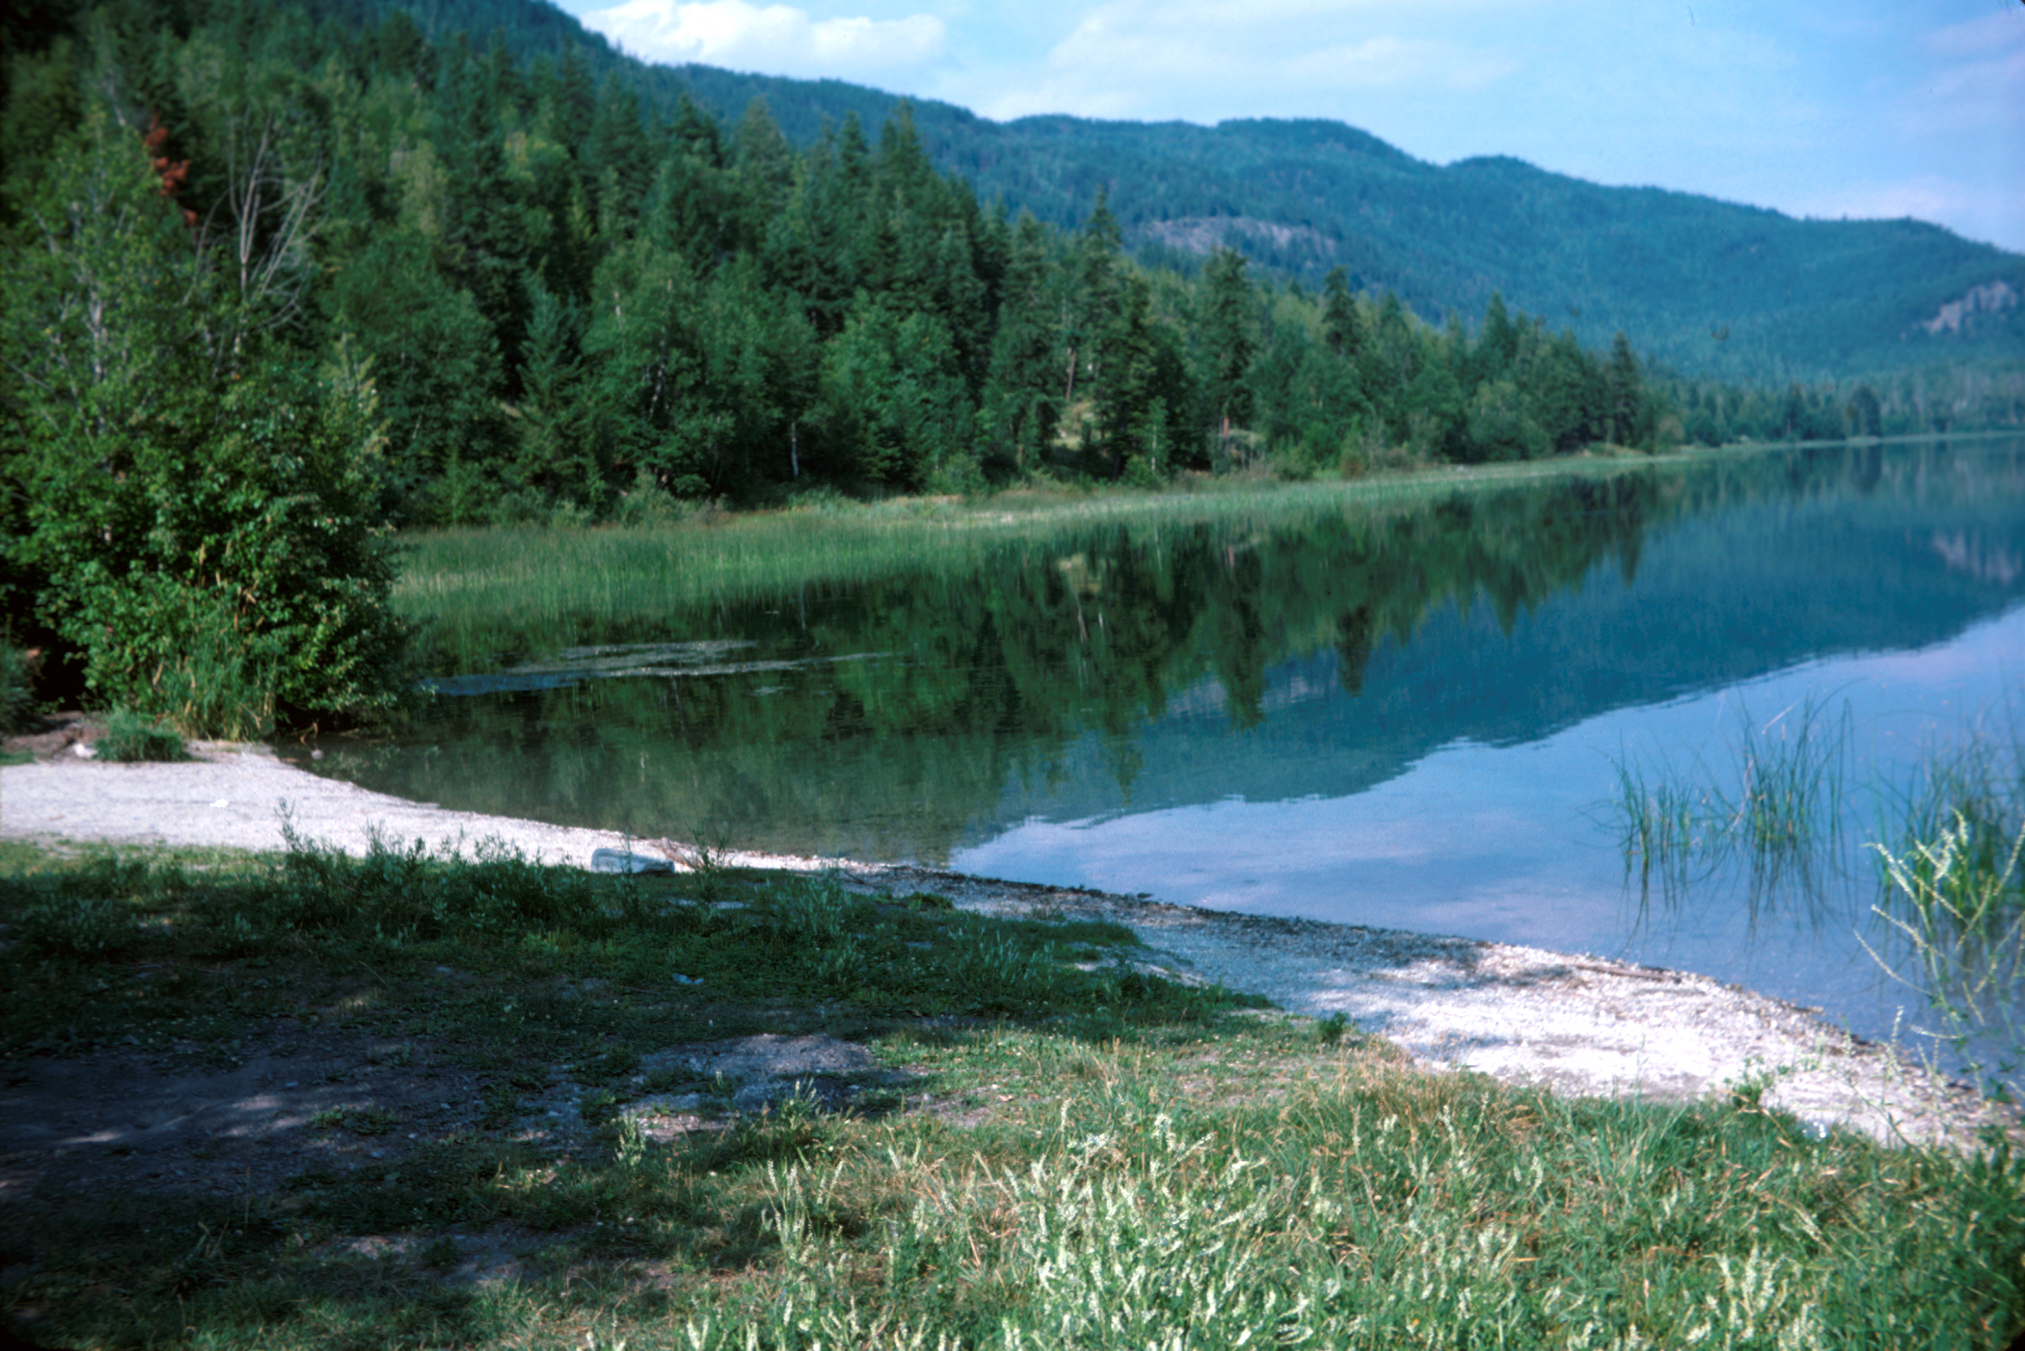 View of White Lake with forest and mountains in the surrounding distance.